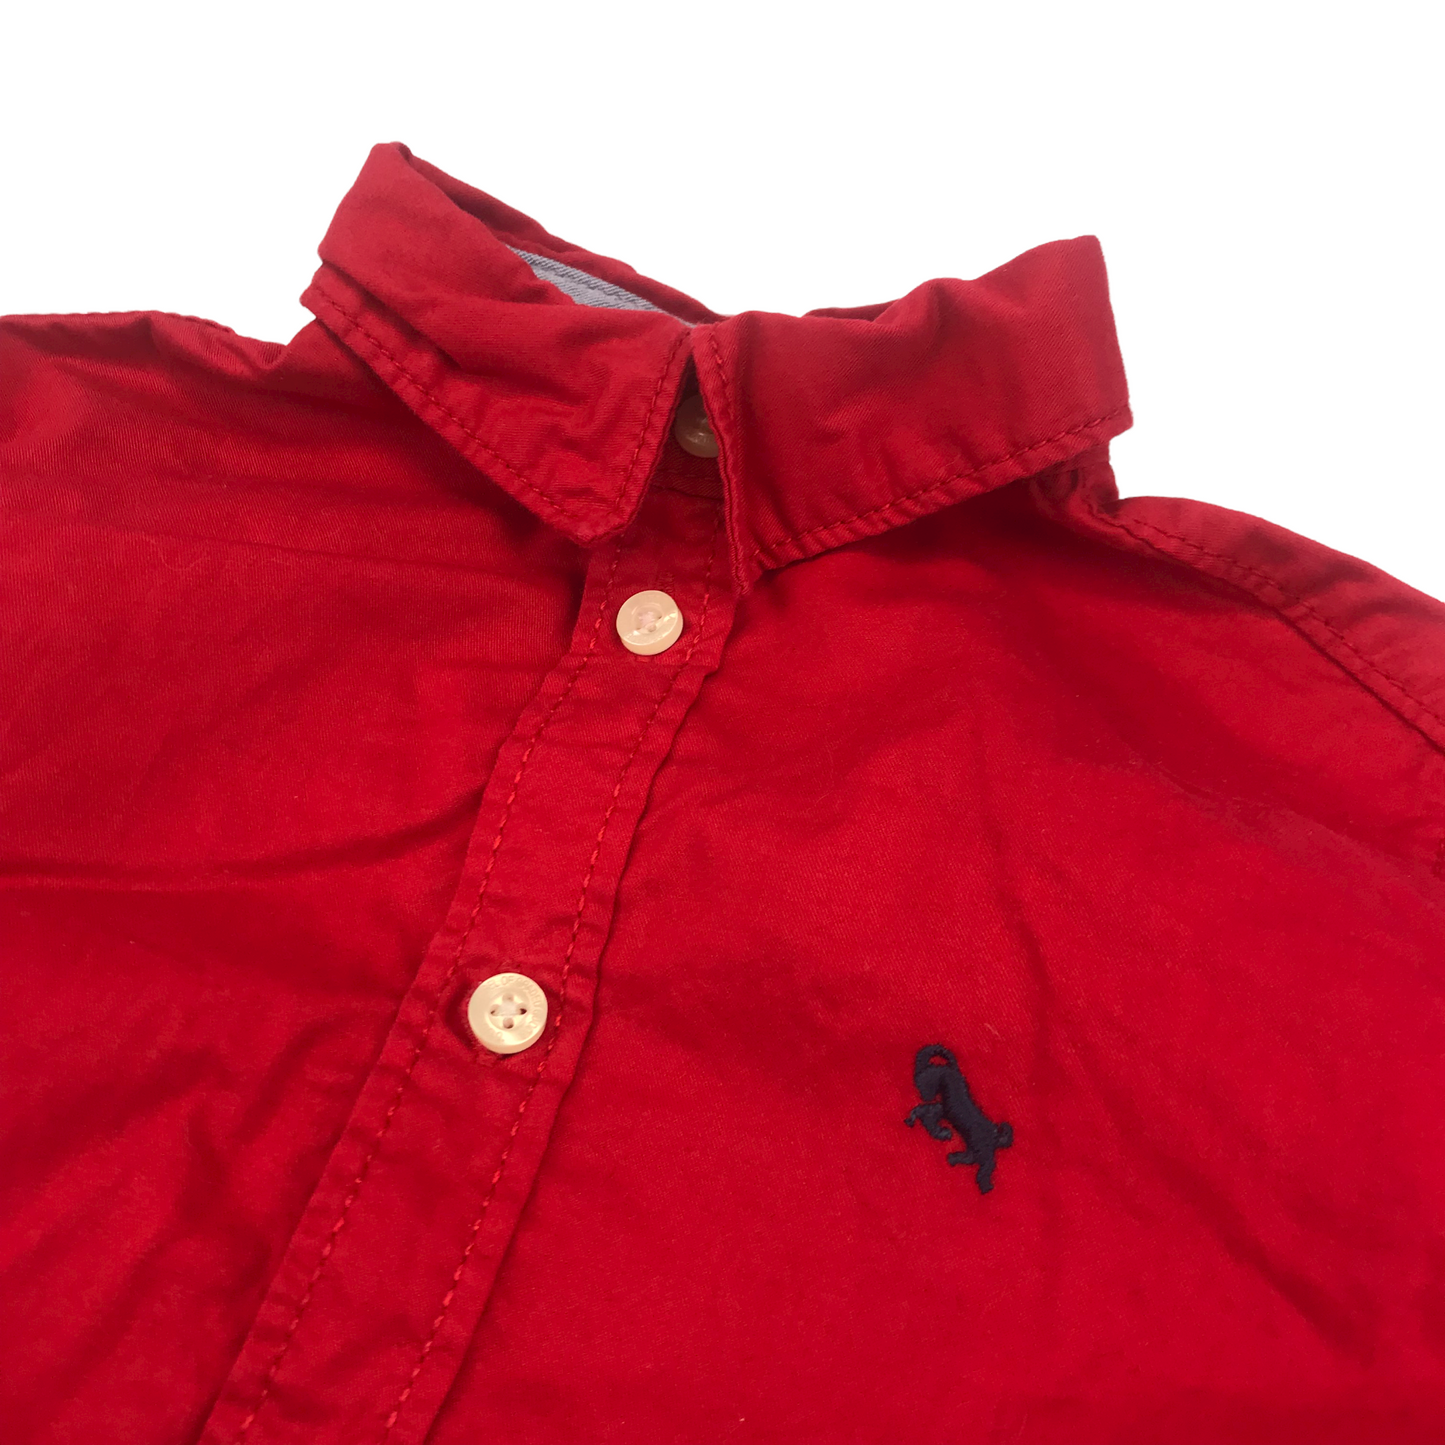 H&M Red Shirt Age 4